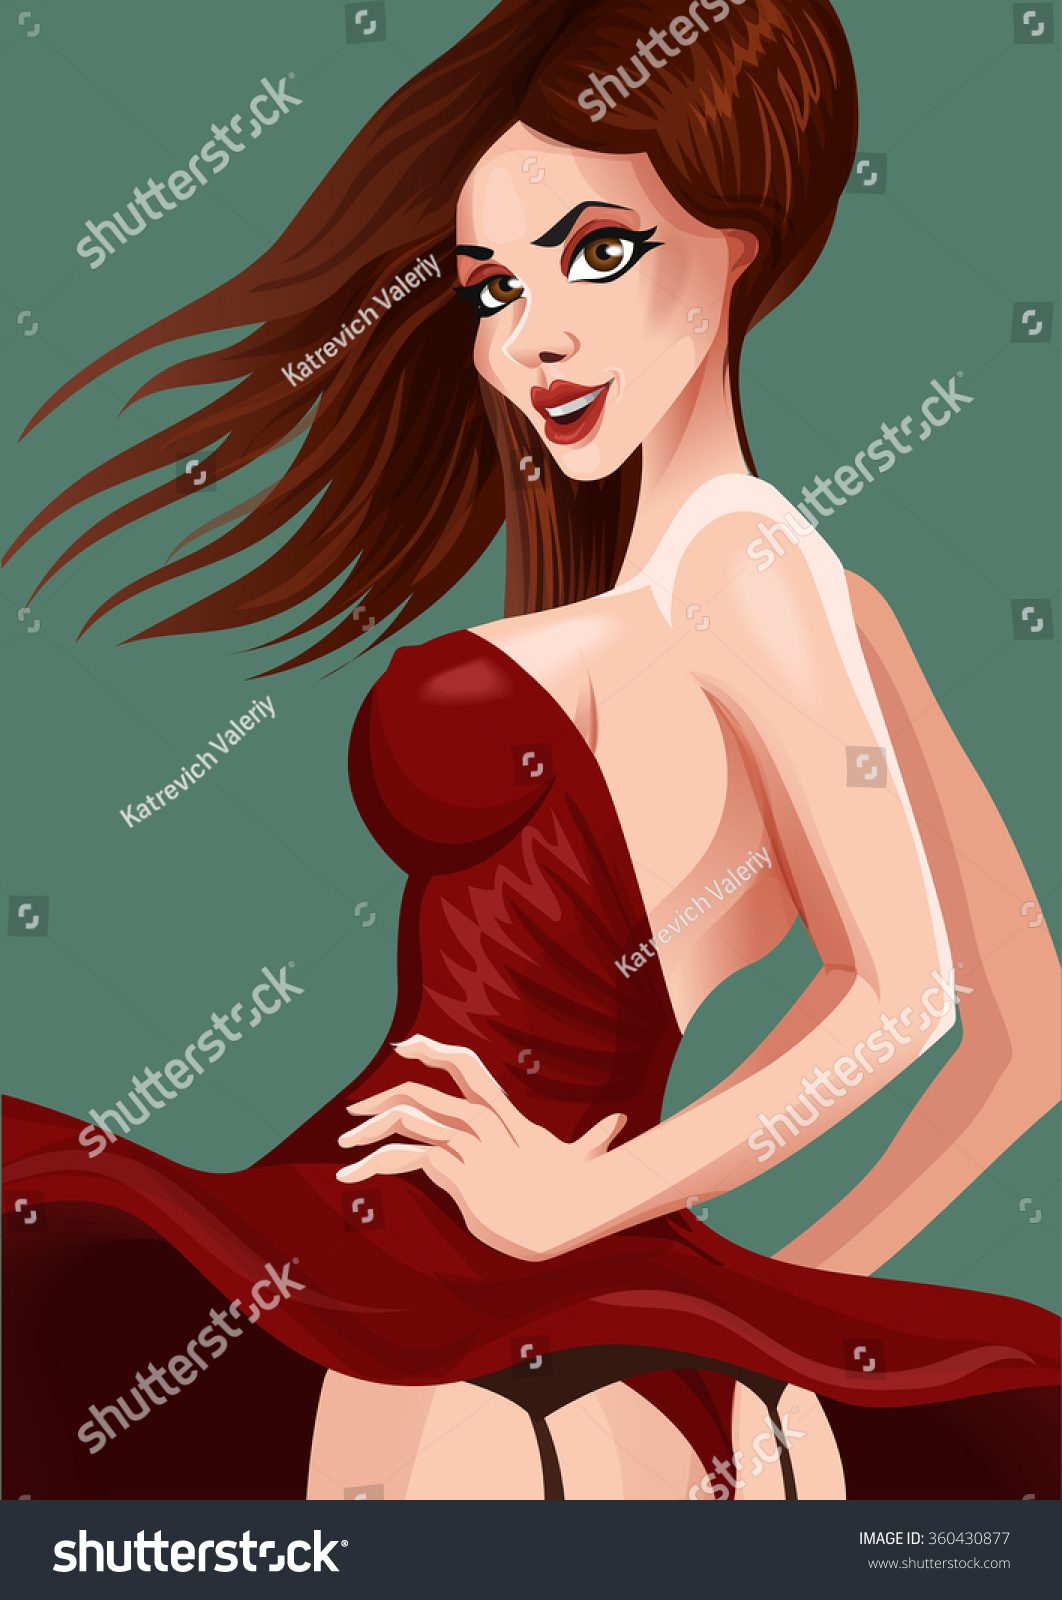 Pin Image Character Sexy Girl Vector Stock Vector Royalty Free 360430877 Shutterstock 3444